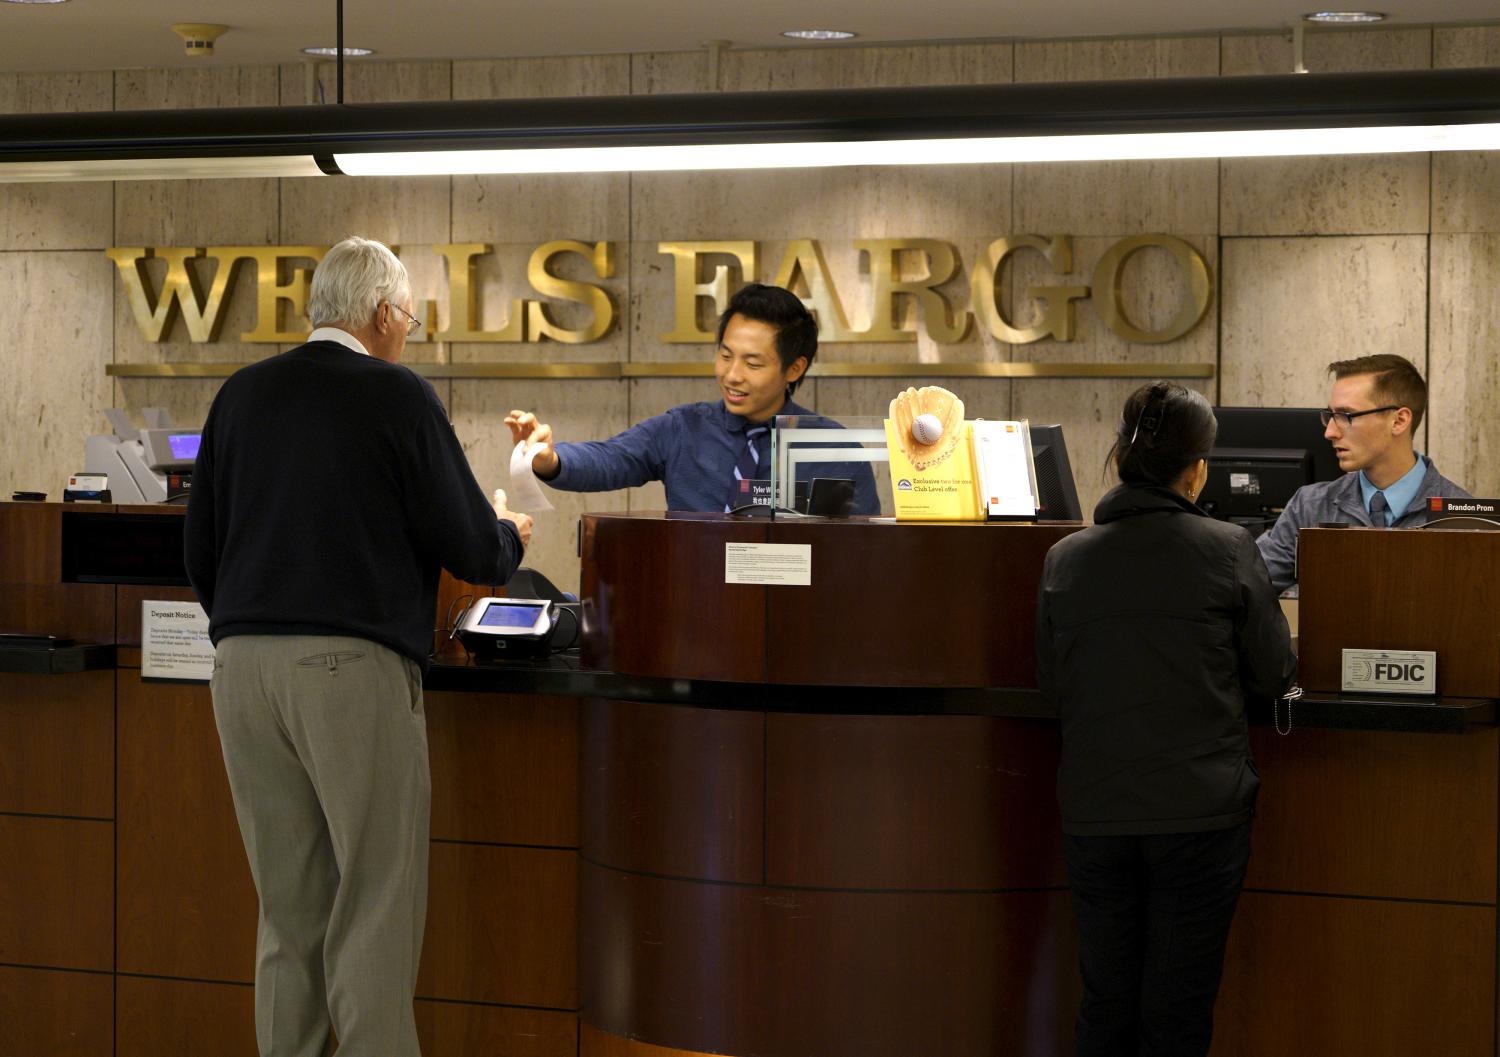 Tellers serve customers at the Wells Fargo & Co. bank.